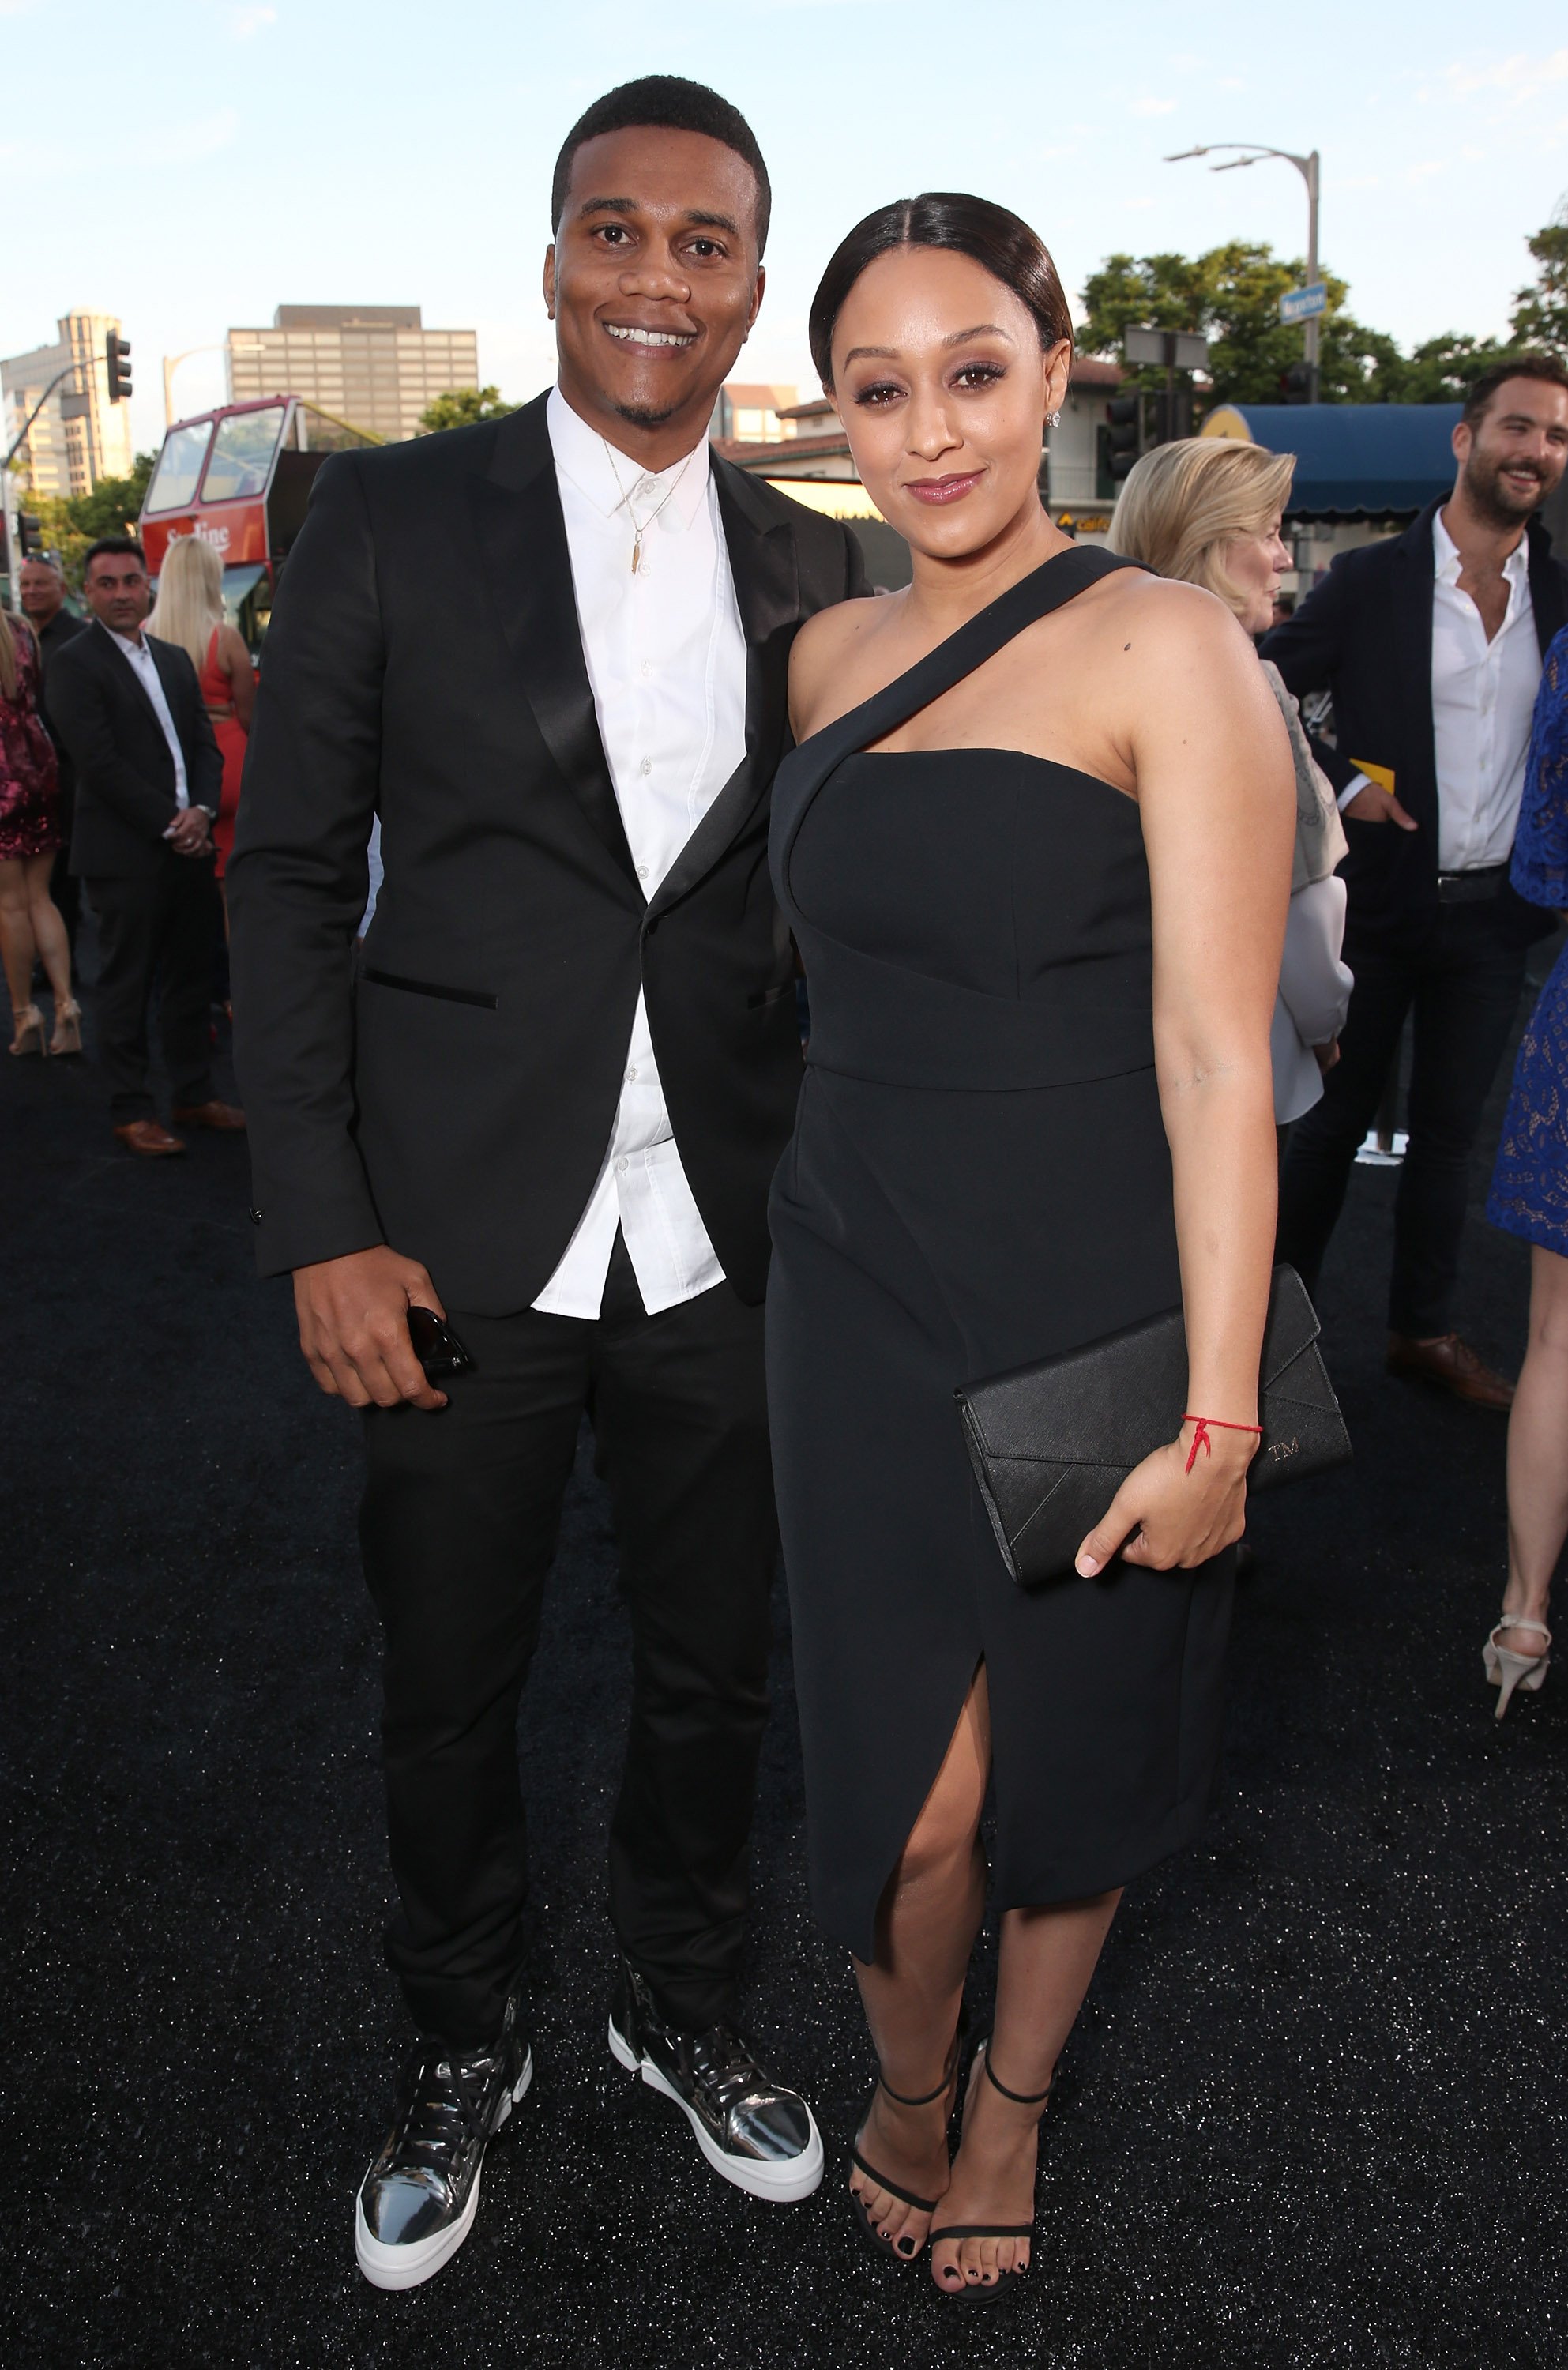 Cory Hardrict & Tia Mowry-Hardrict at the premiere Of "Central Intelligence" on June 10, 2016. | Photo: Getty Images